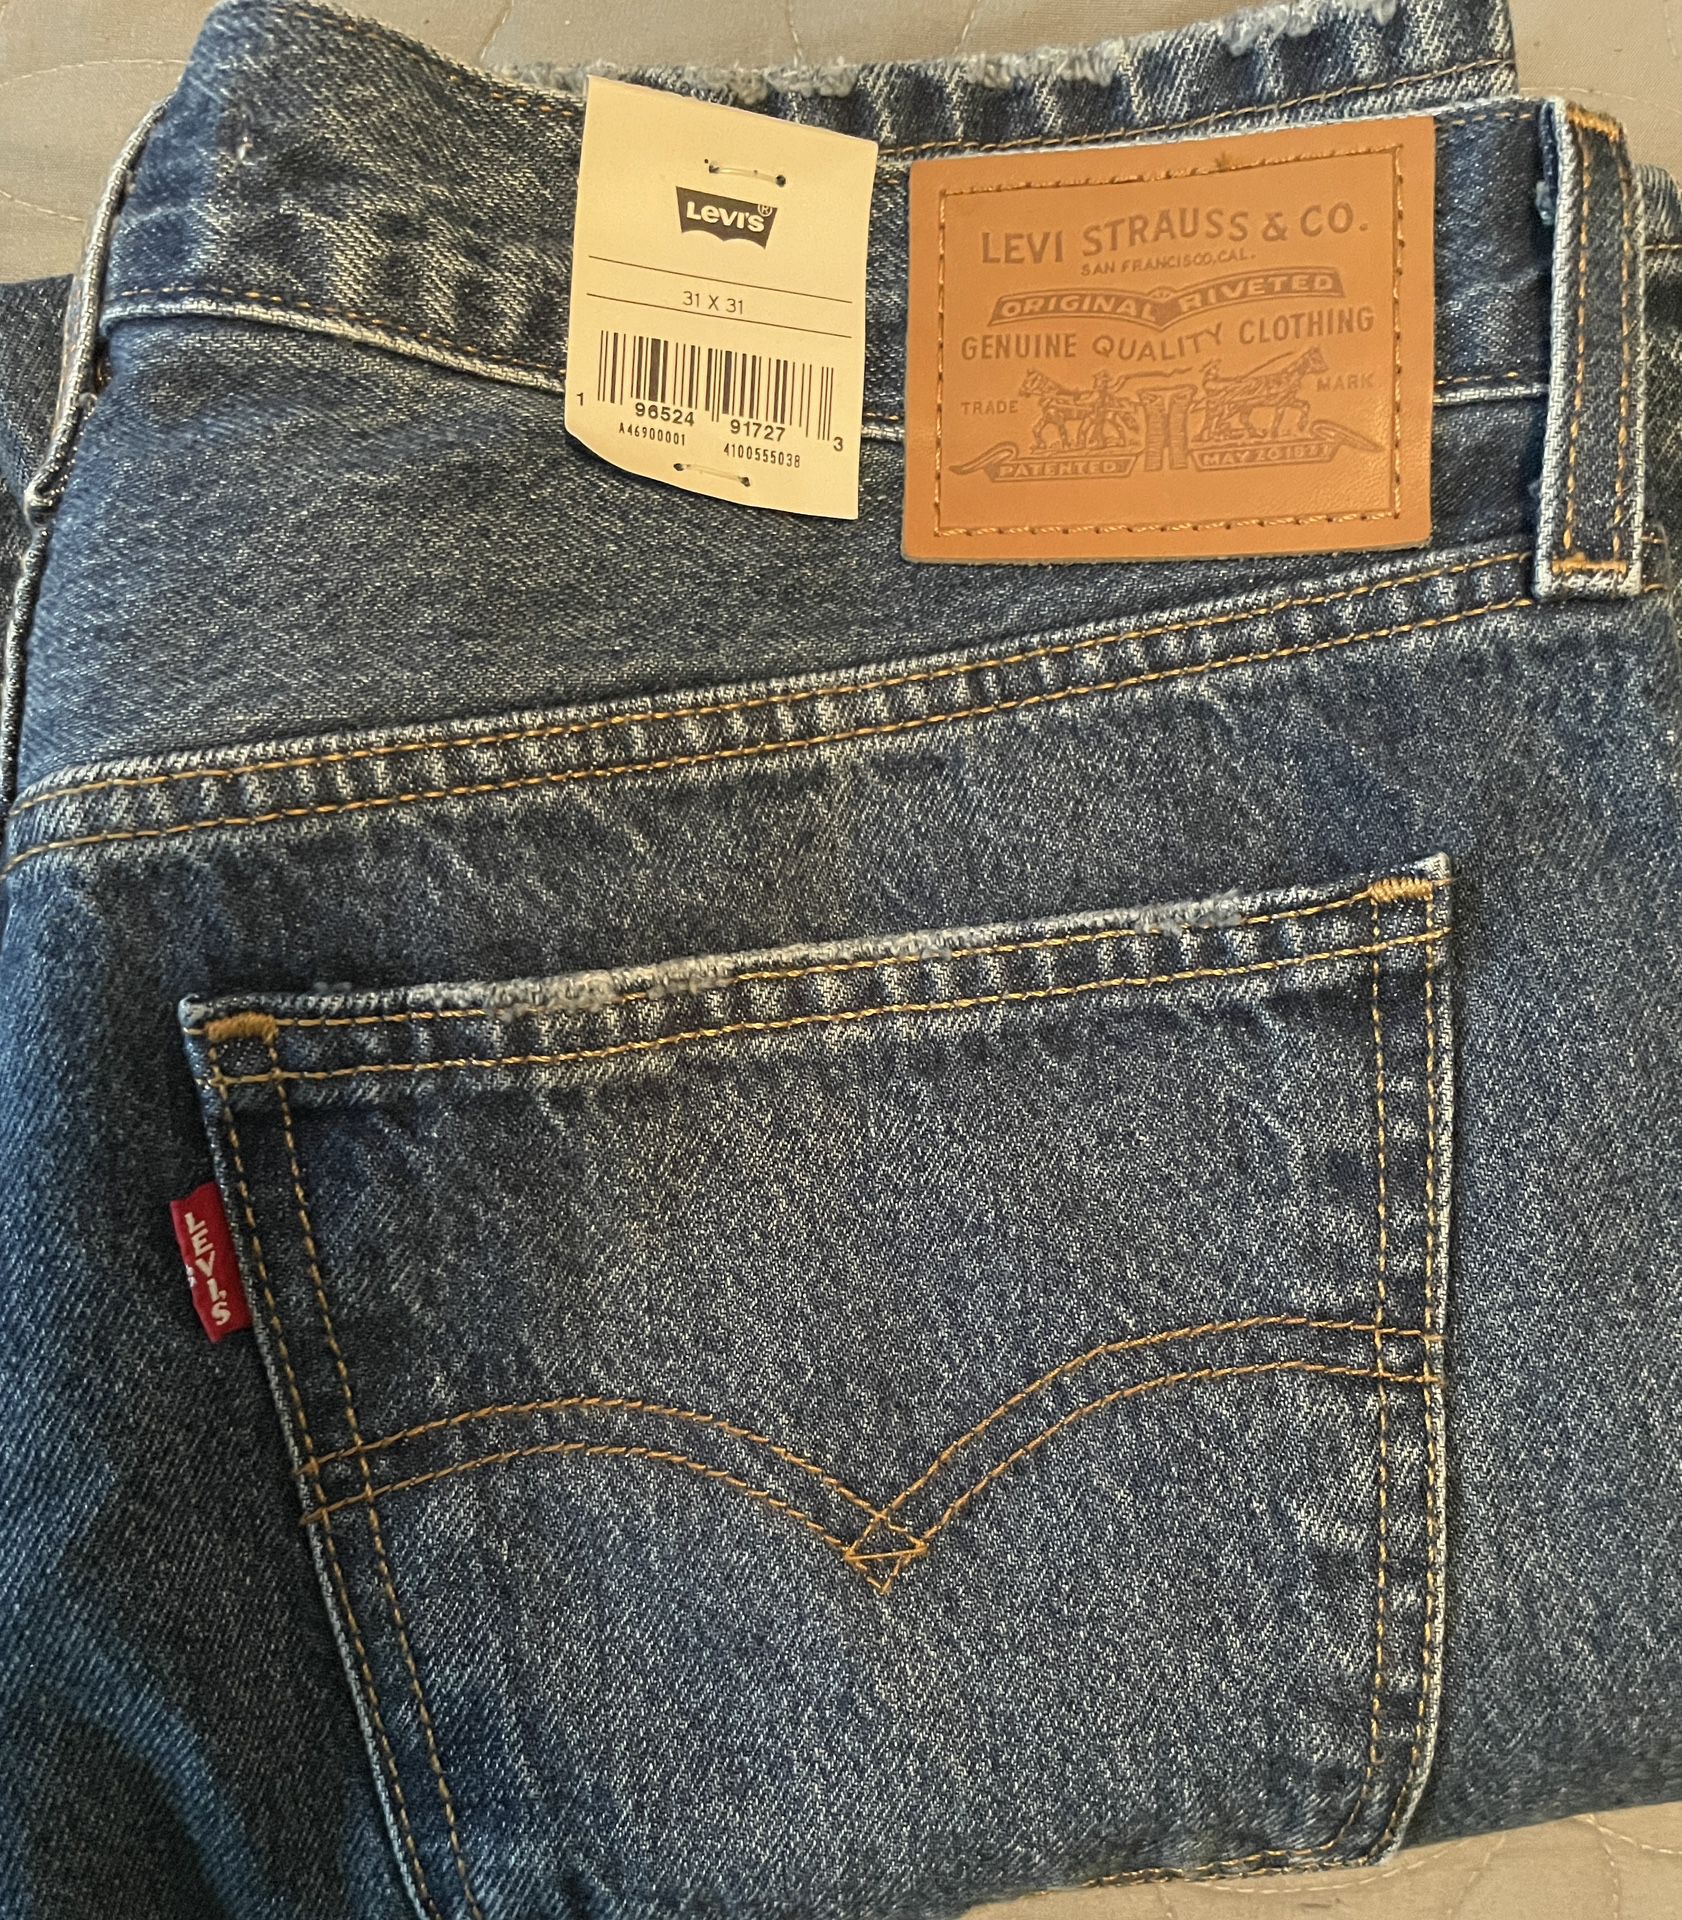 Middy straight Levi’s Jeans For Women